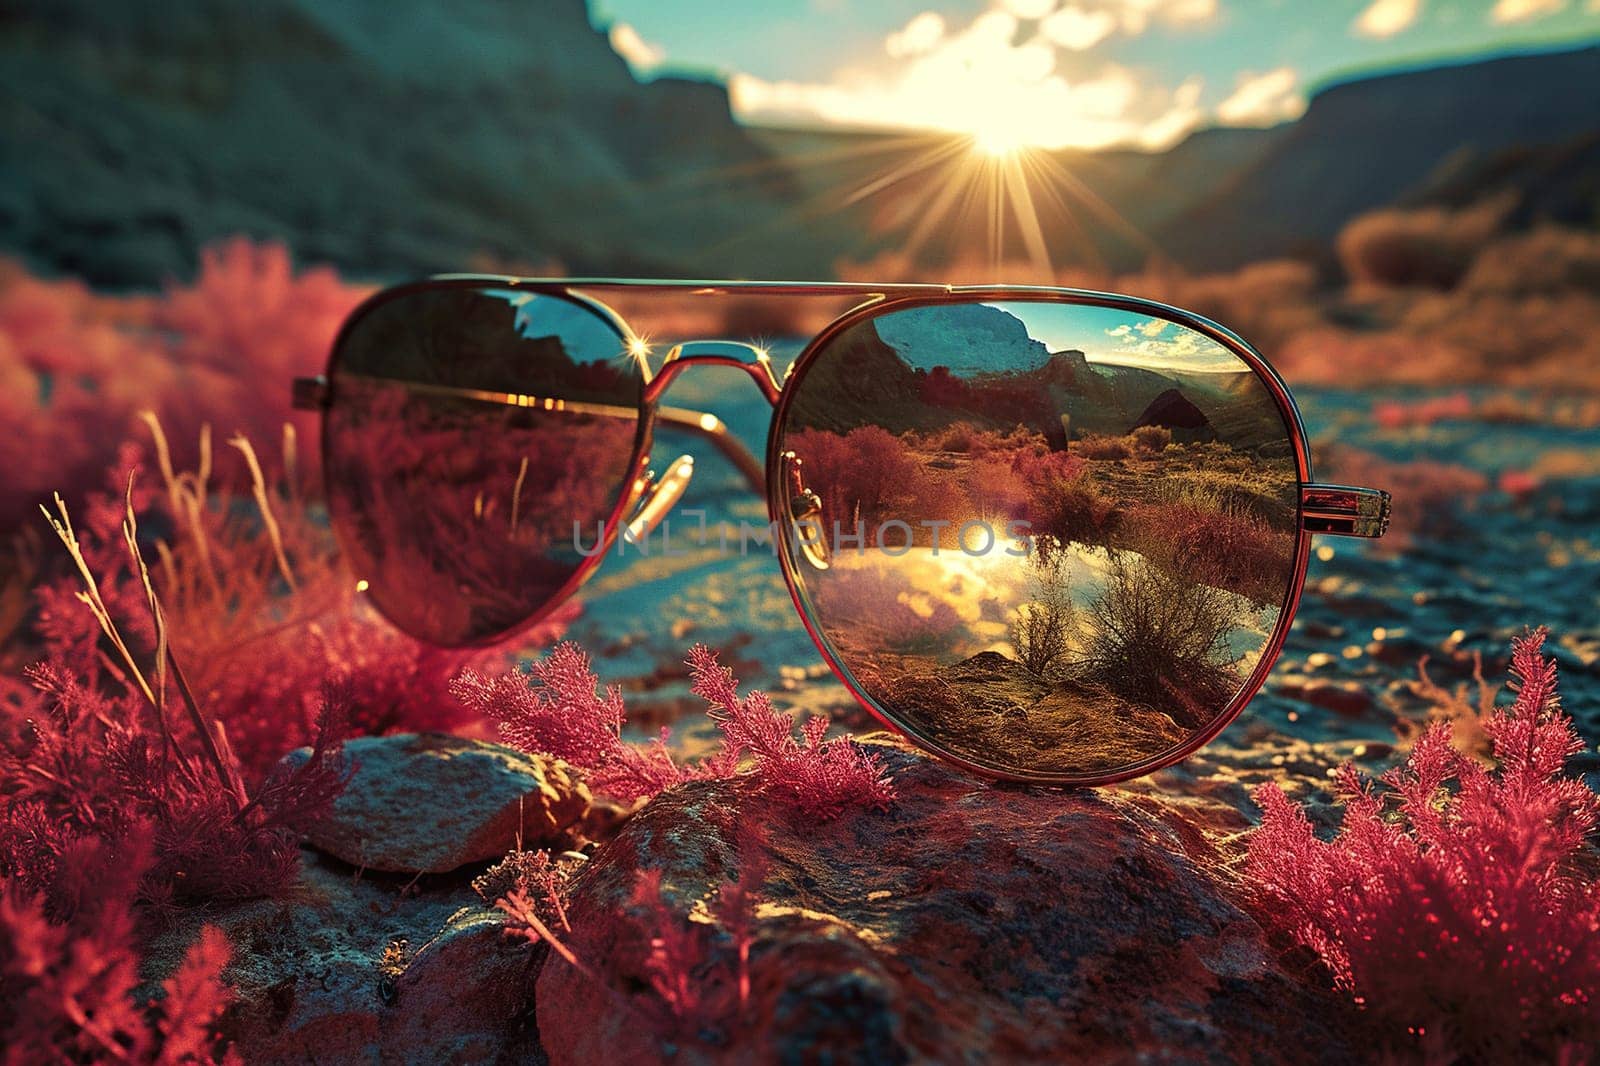 Reflection of a mountain landscape in the glasses of sunglasses. Concept of travel, freedom, lifestyle.